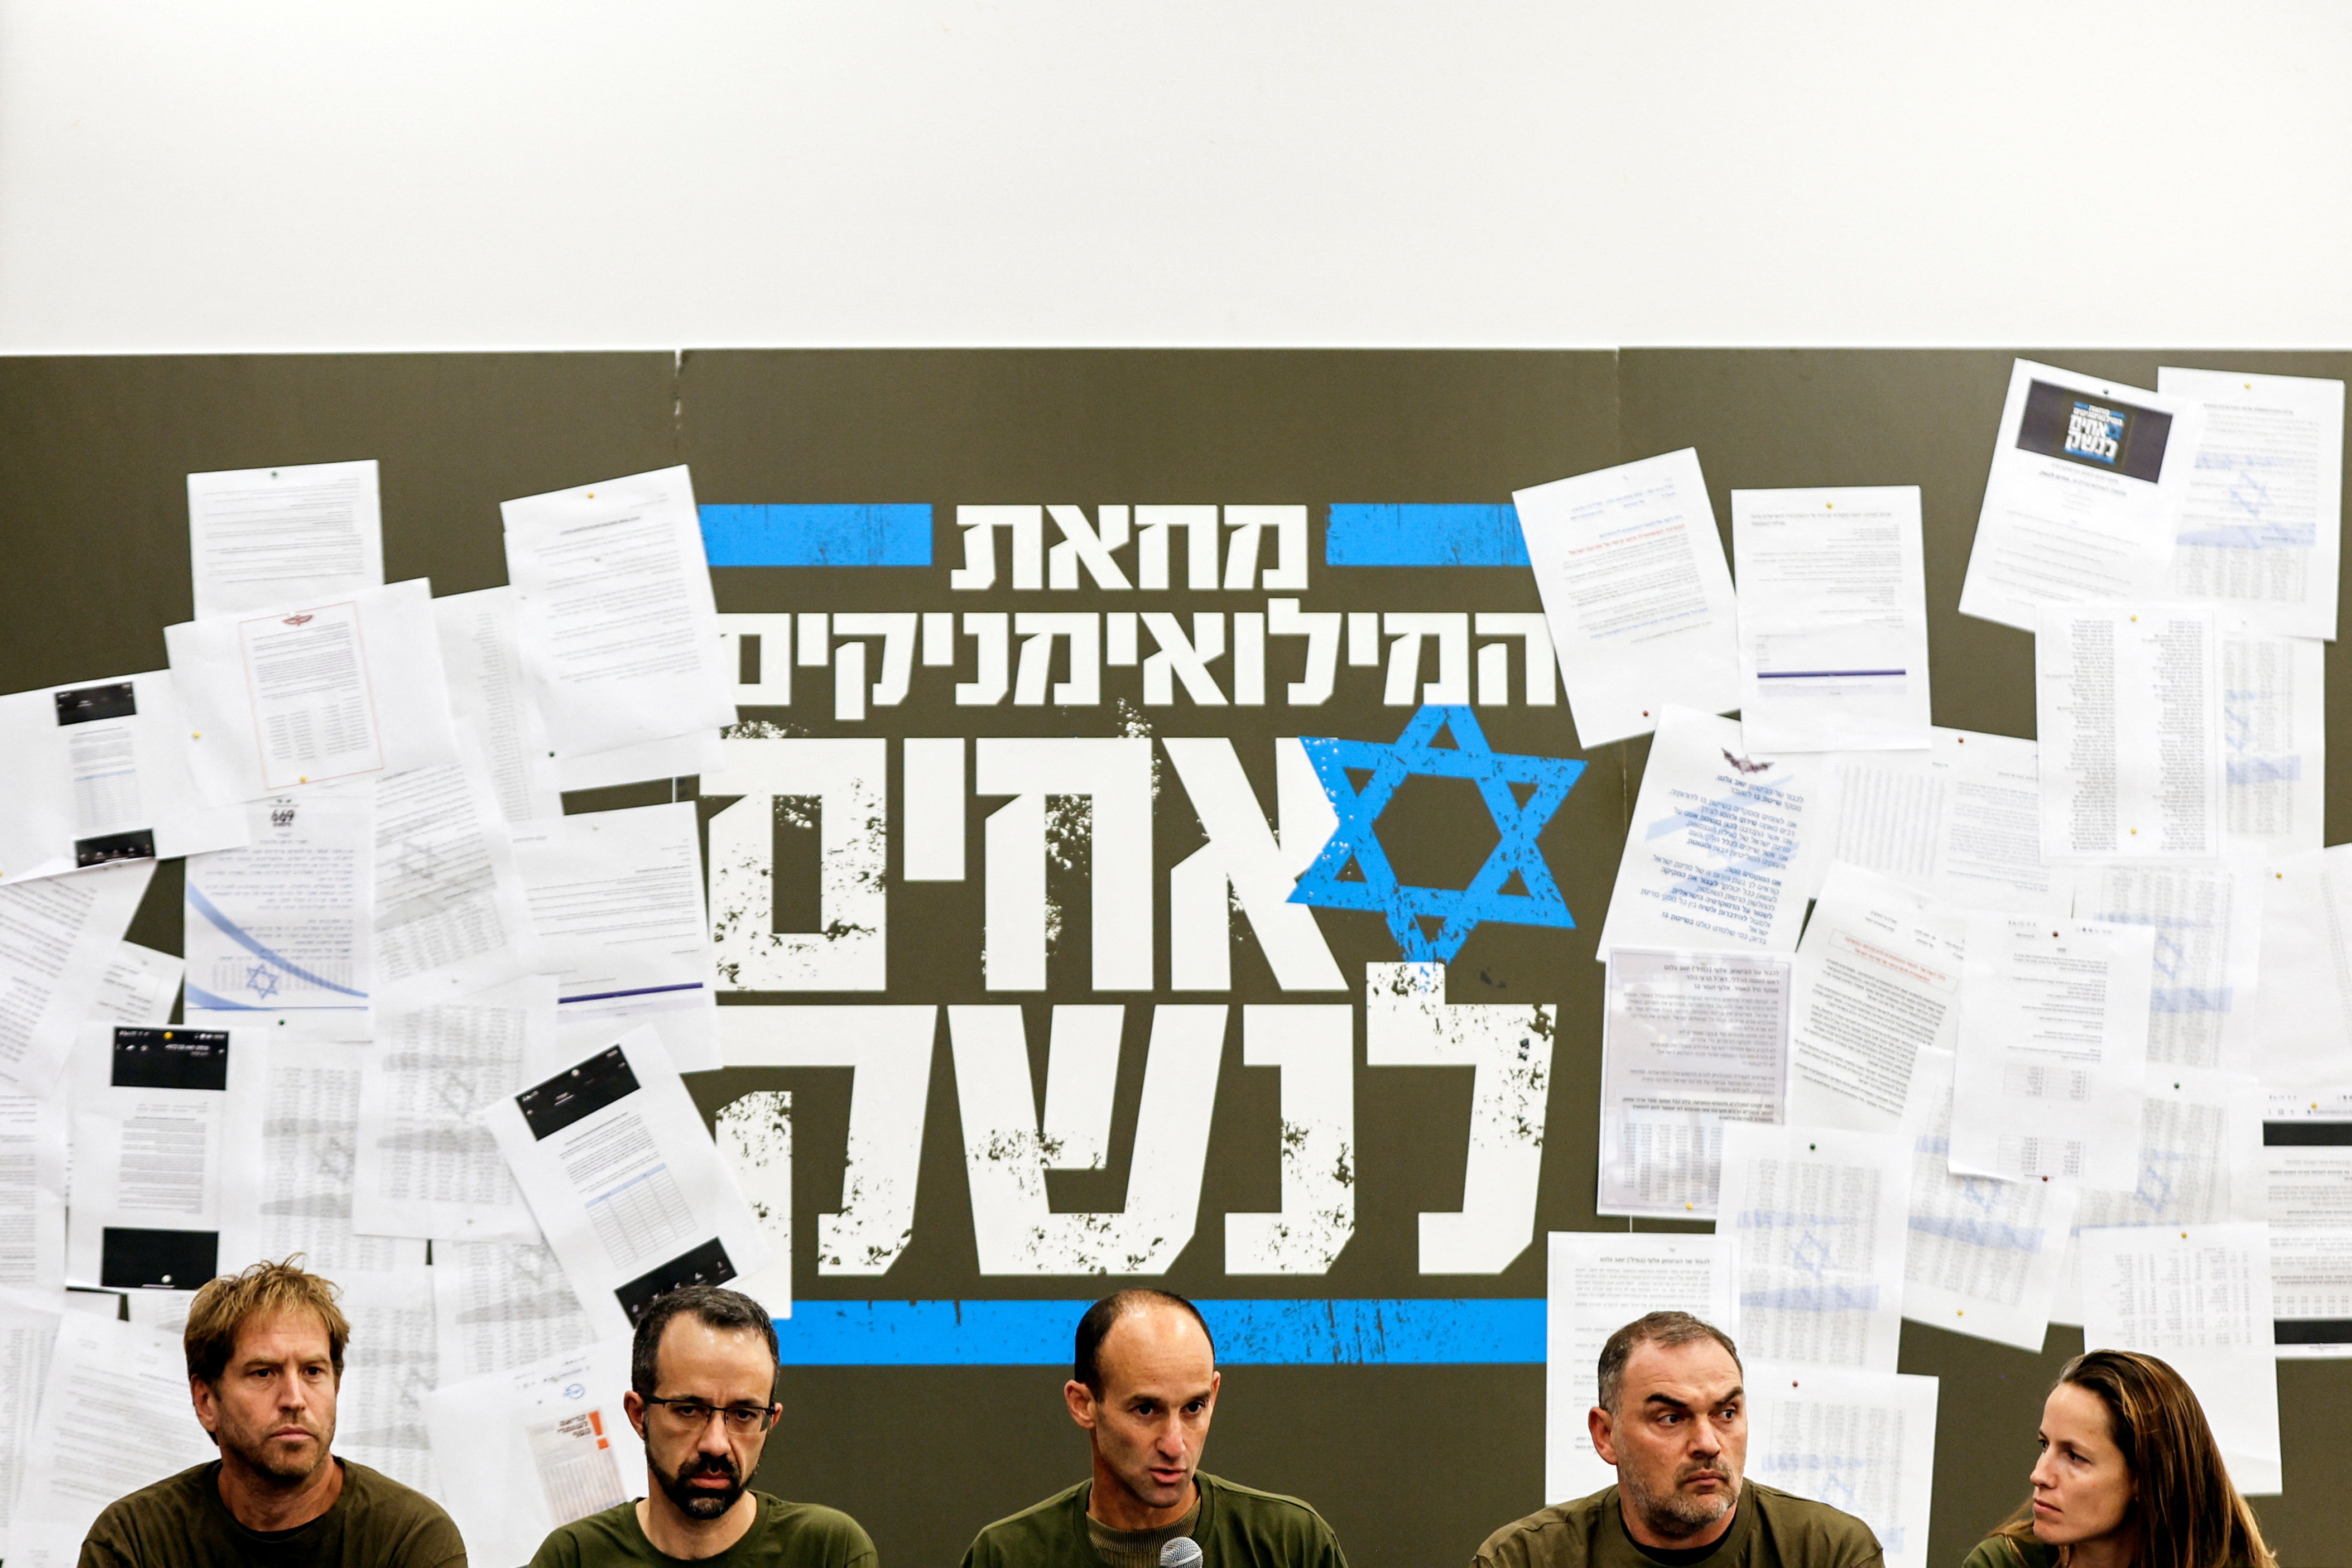 Members of the 'Brothers in Arms' reservist protest group hold a news conference, as Israeli Prime Minister Benjamin Netanyahu's nationalist coalition government presses on with its judicial overhaul, in Herzliya near Tel Aviv